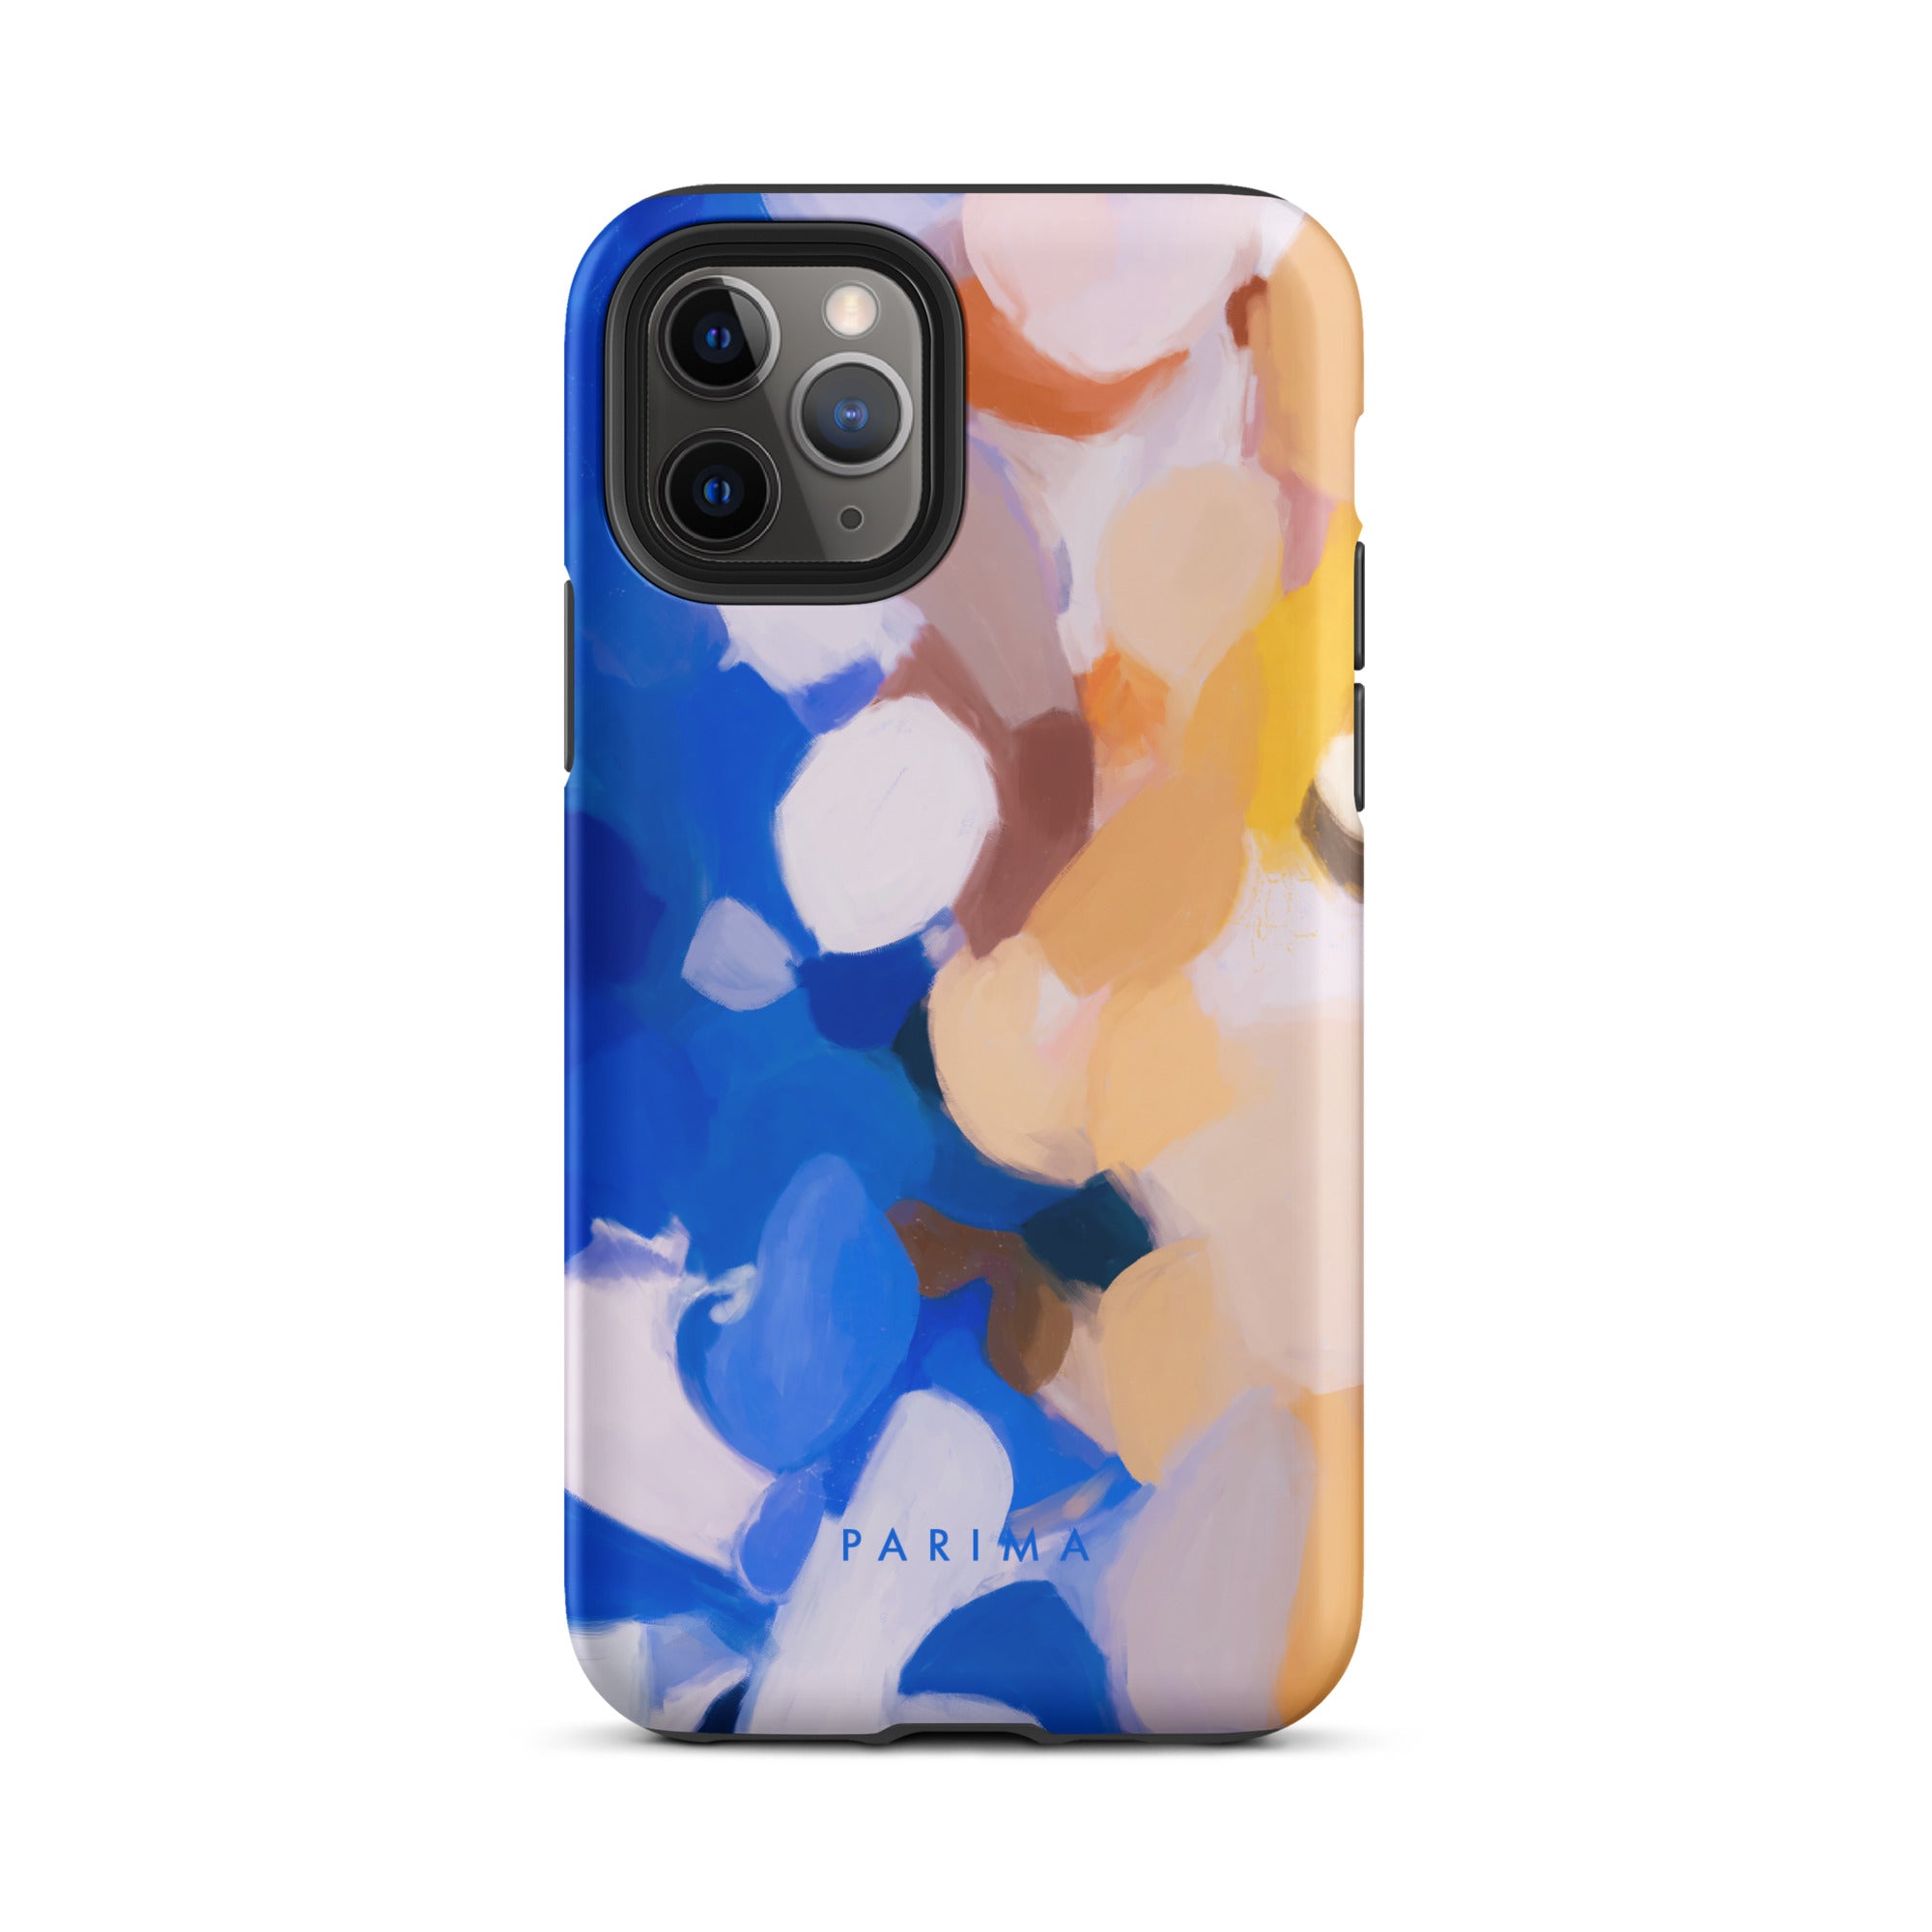 Bluebell, blue and yellow abstract art - iPhone 11 Pro tough case by Parima Studio